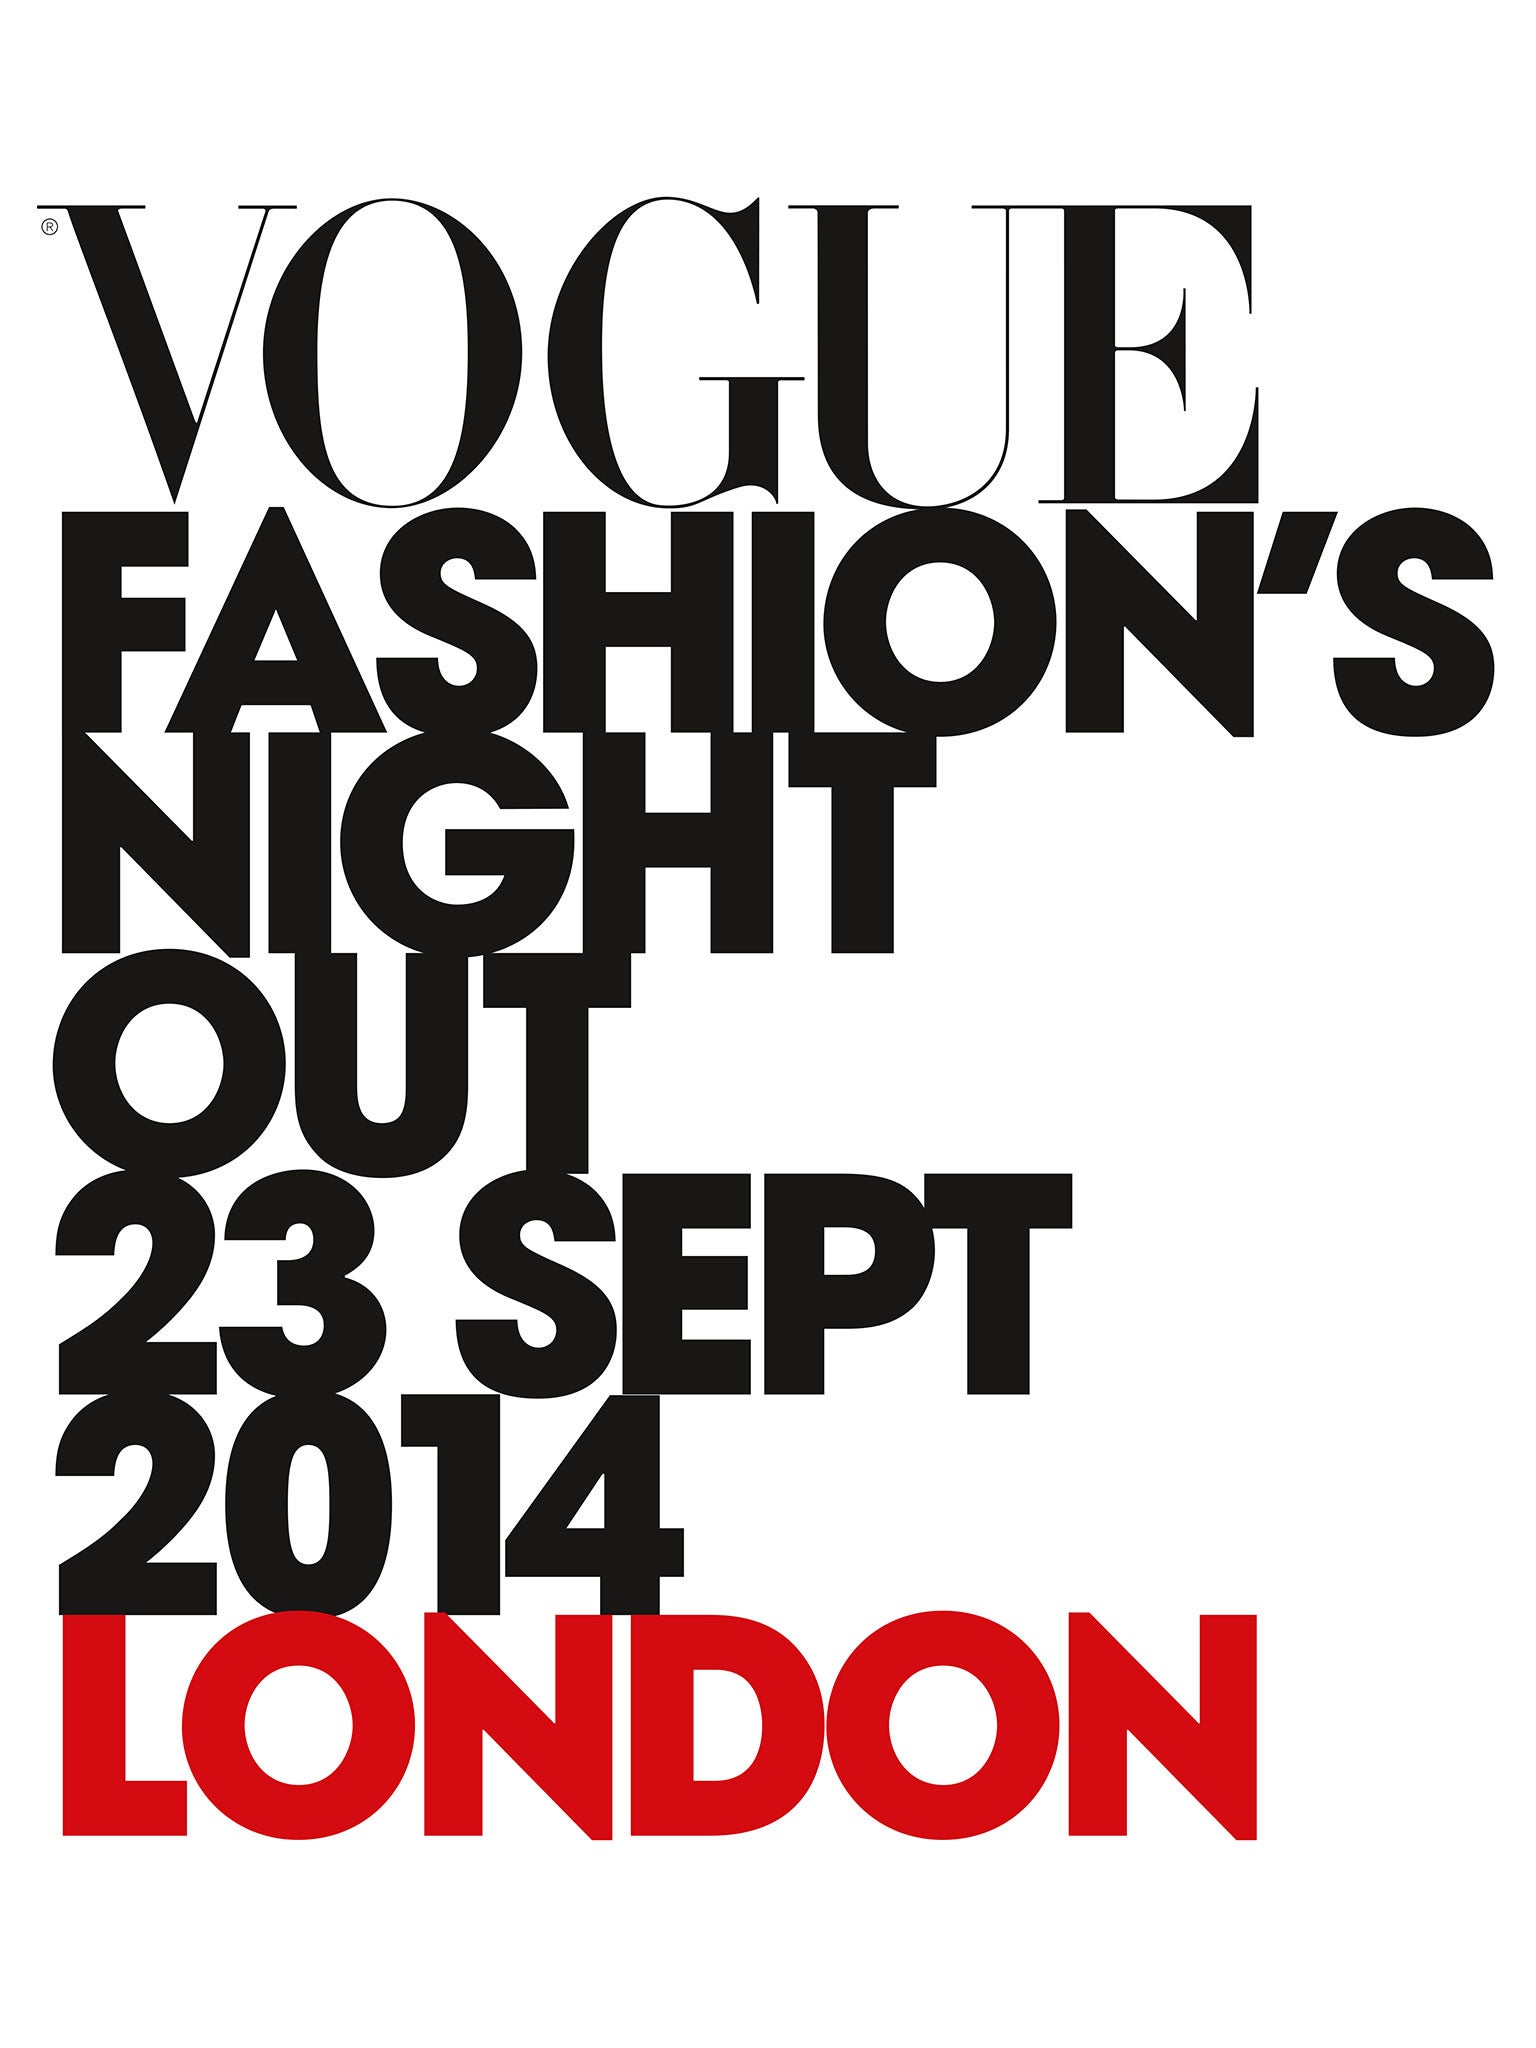 A guide to Vogue Fashion’s Night Out 2014 London | The Independent ...